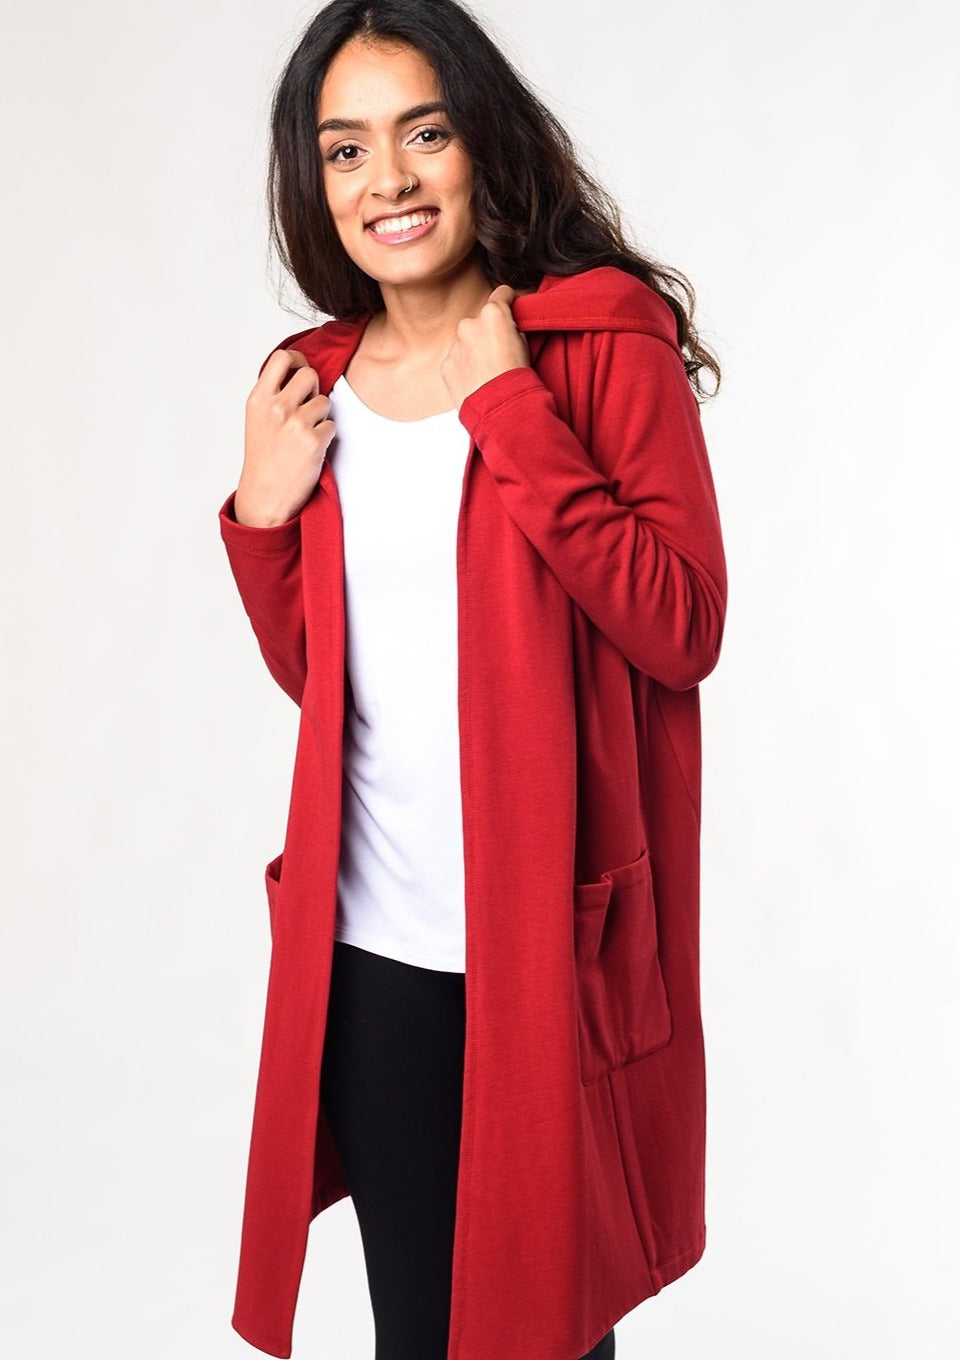 An easy open-front cardigan for every-day layering. Made with a cozy-soft organic fleece that feels like a warm hug on the body. Fabrication: 66% Viscose from Bamboo, 28% Cotton, 6% Spandex $135.00 ruby red